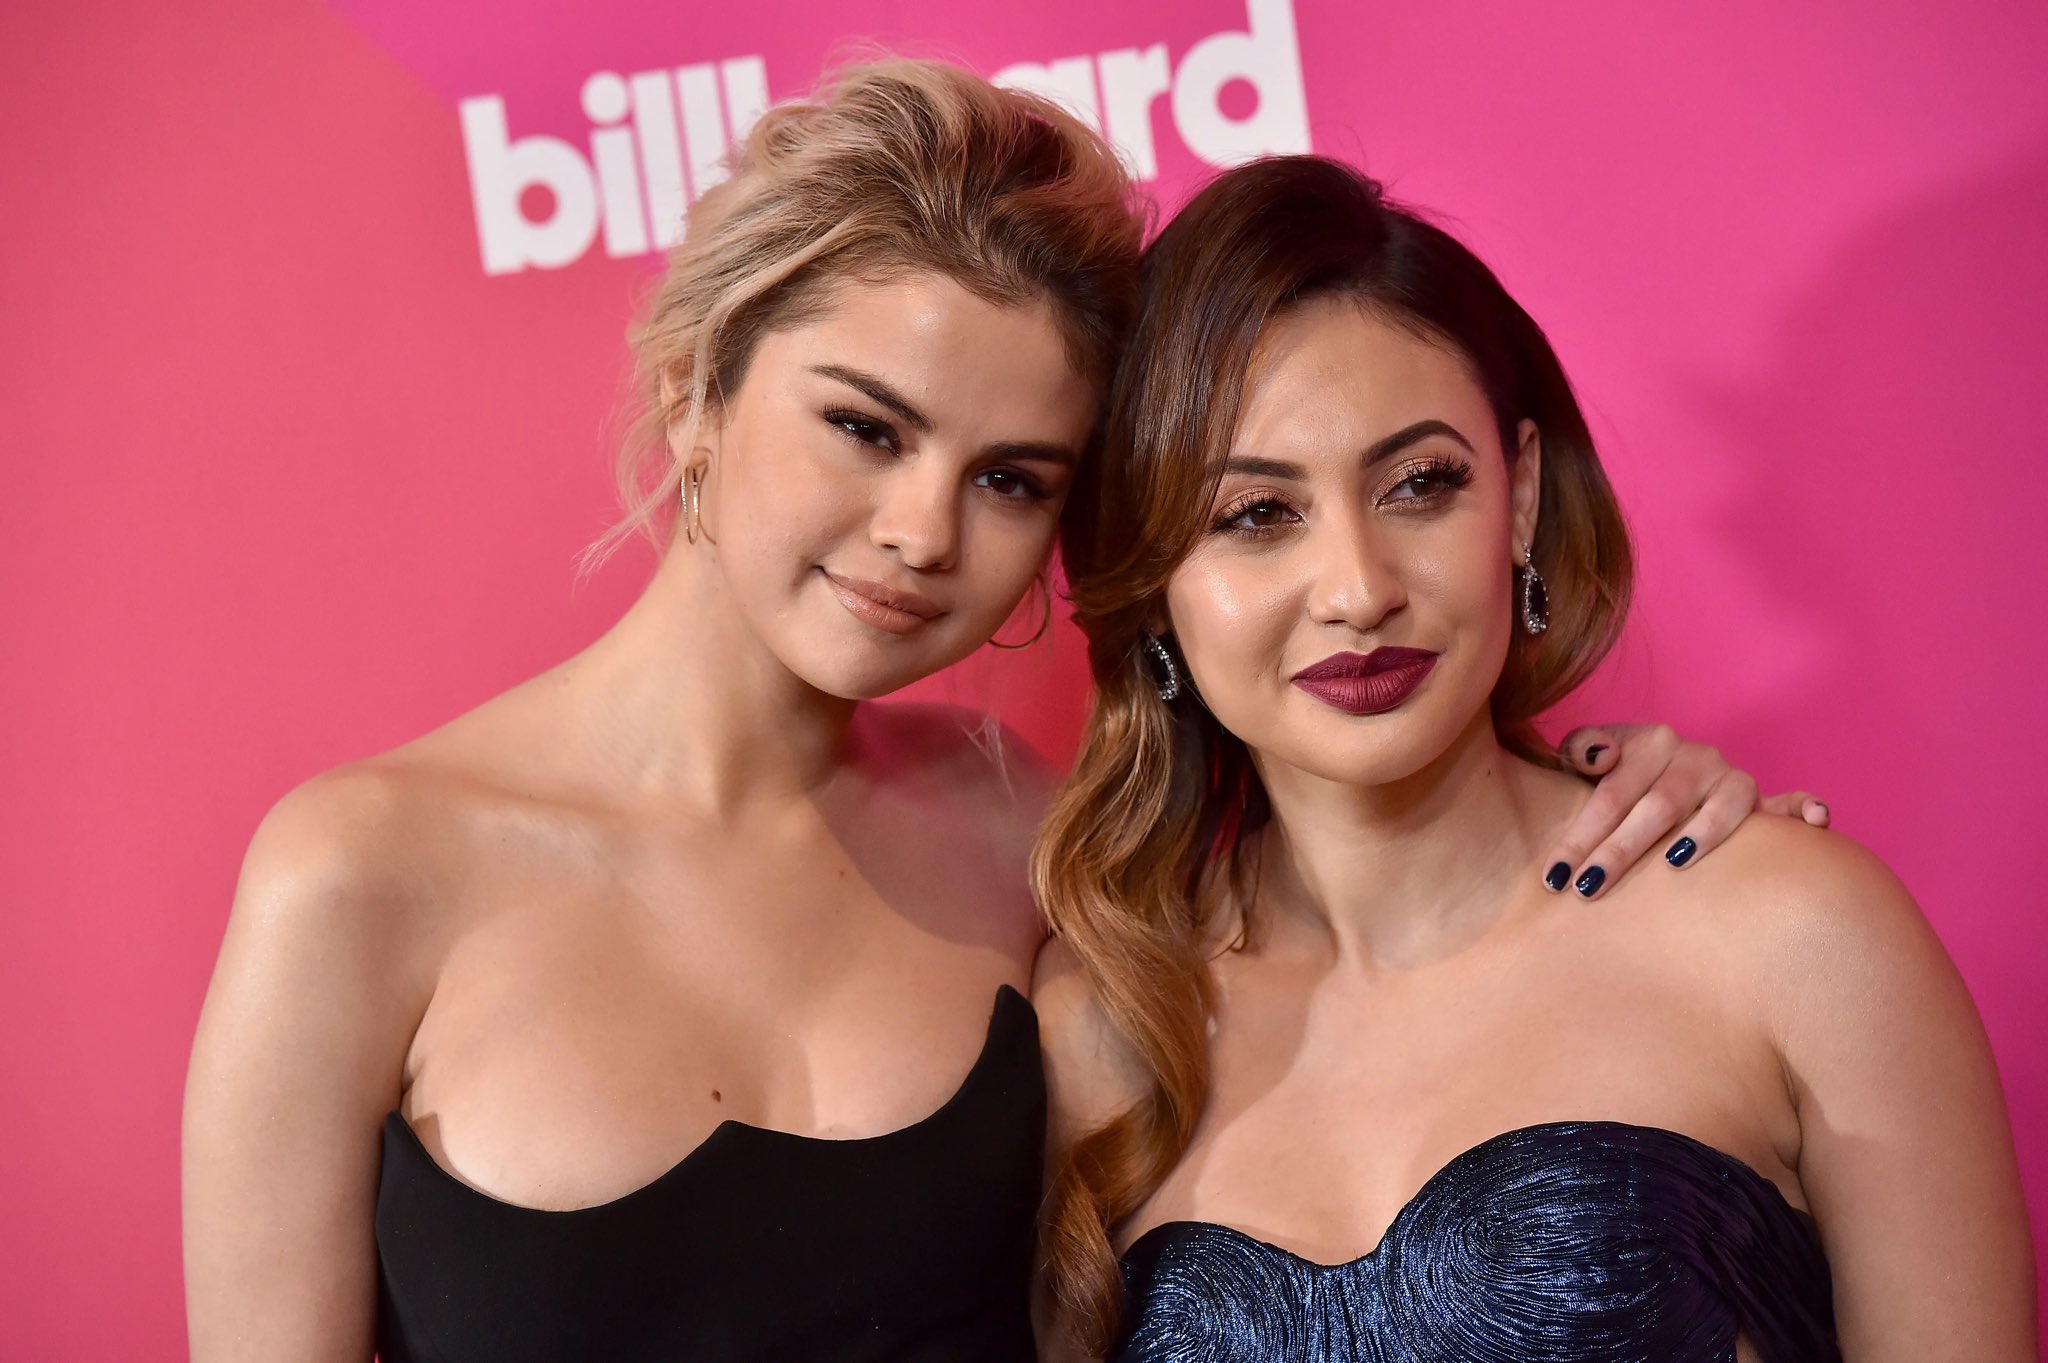 Francia Raisa Says There’s ‘No Beef’ Between Her and Selena Gomez